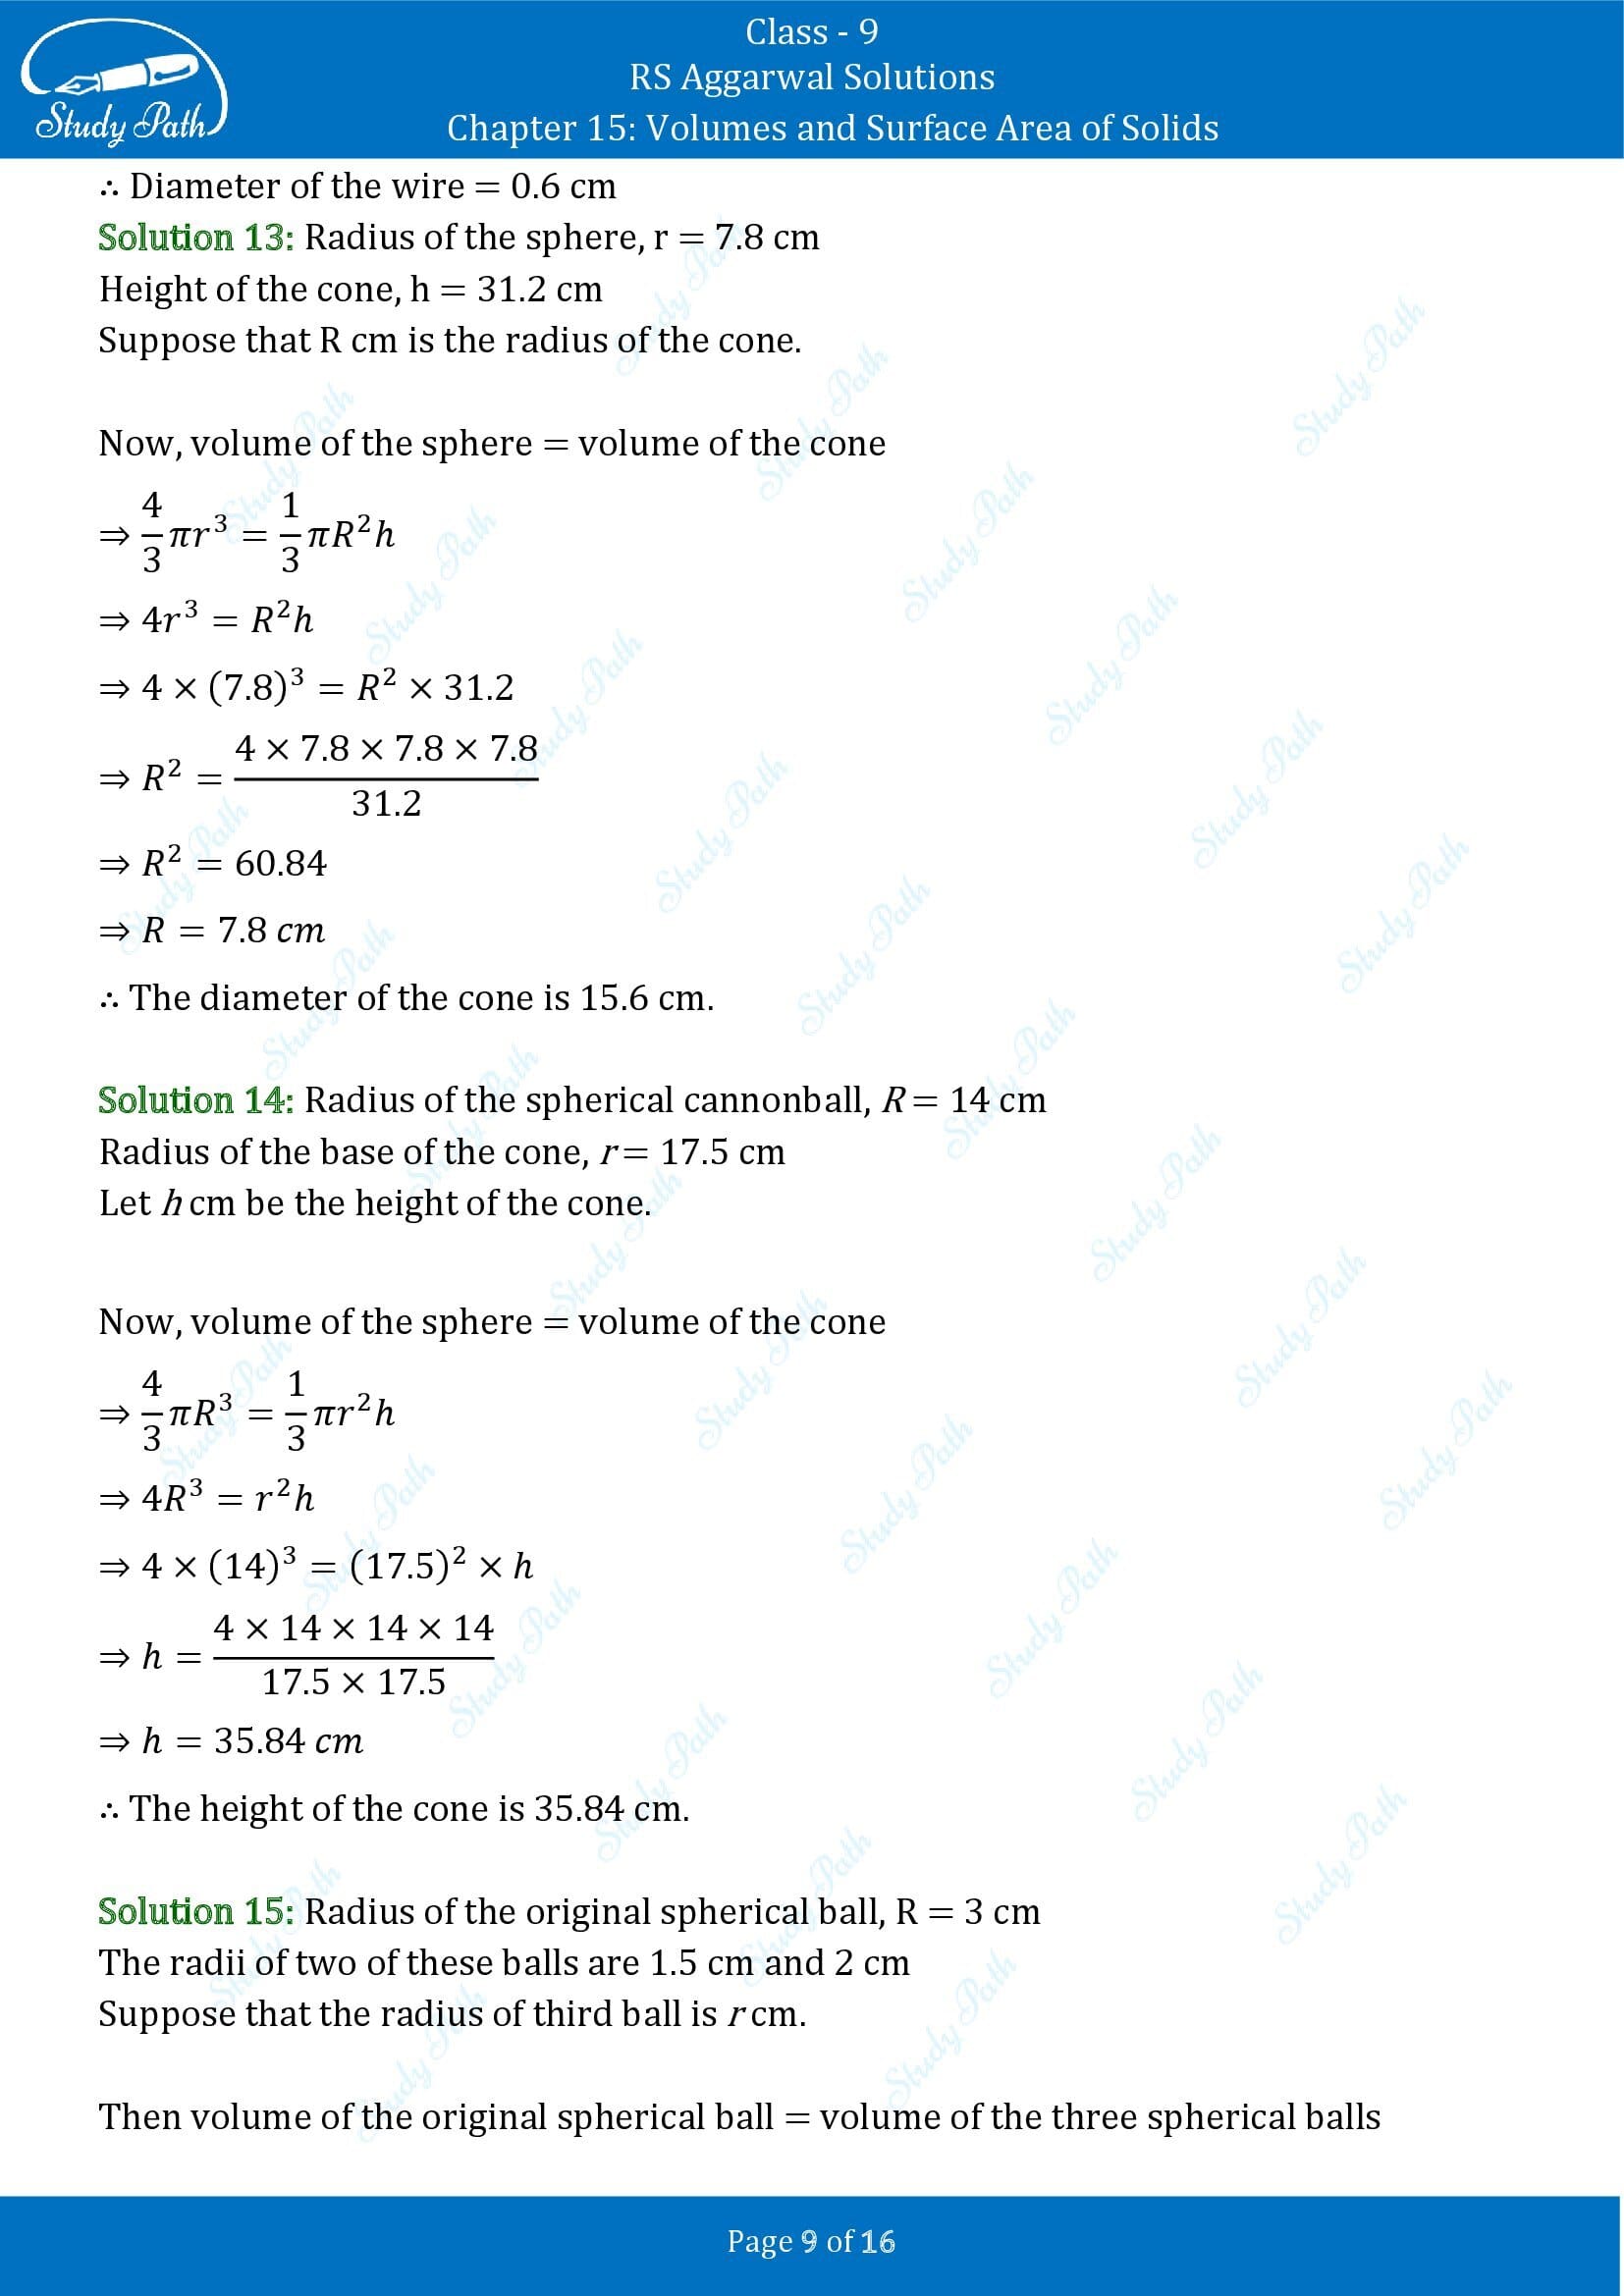 RS Aggarwal Solutions Class 9 Chapter 15 Volumes and Surface Area of Solids Exercise 15D 00009